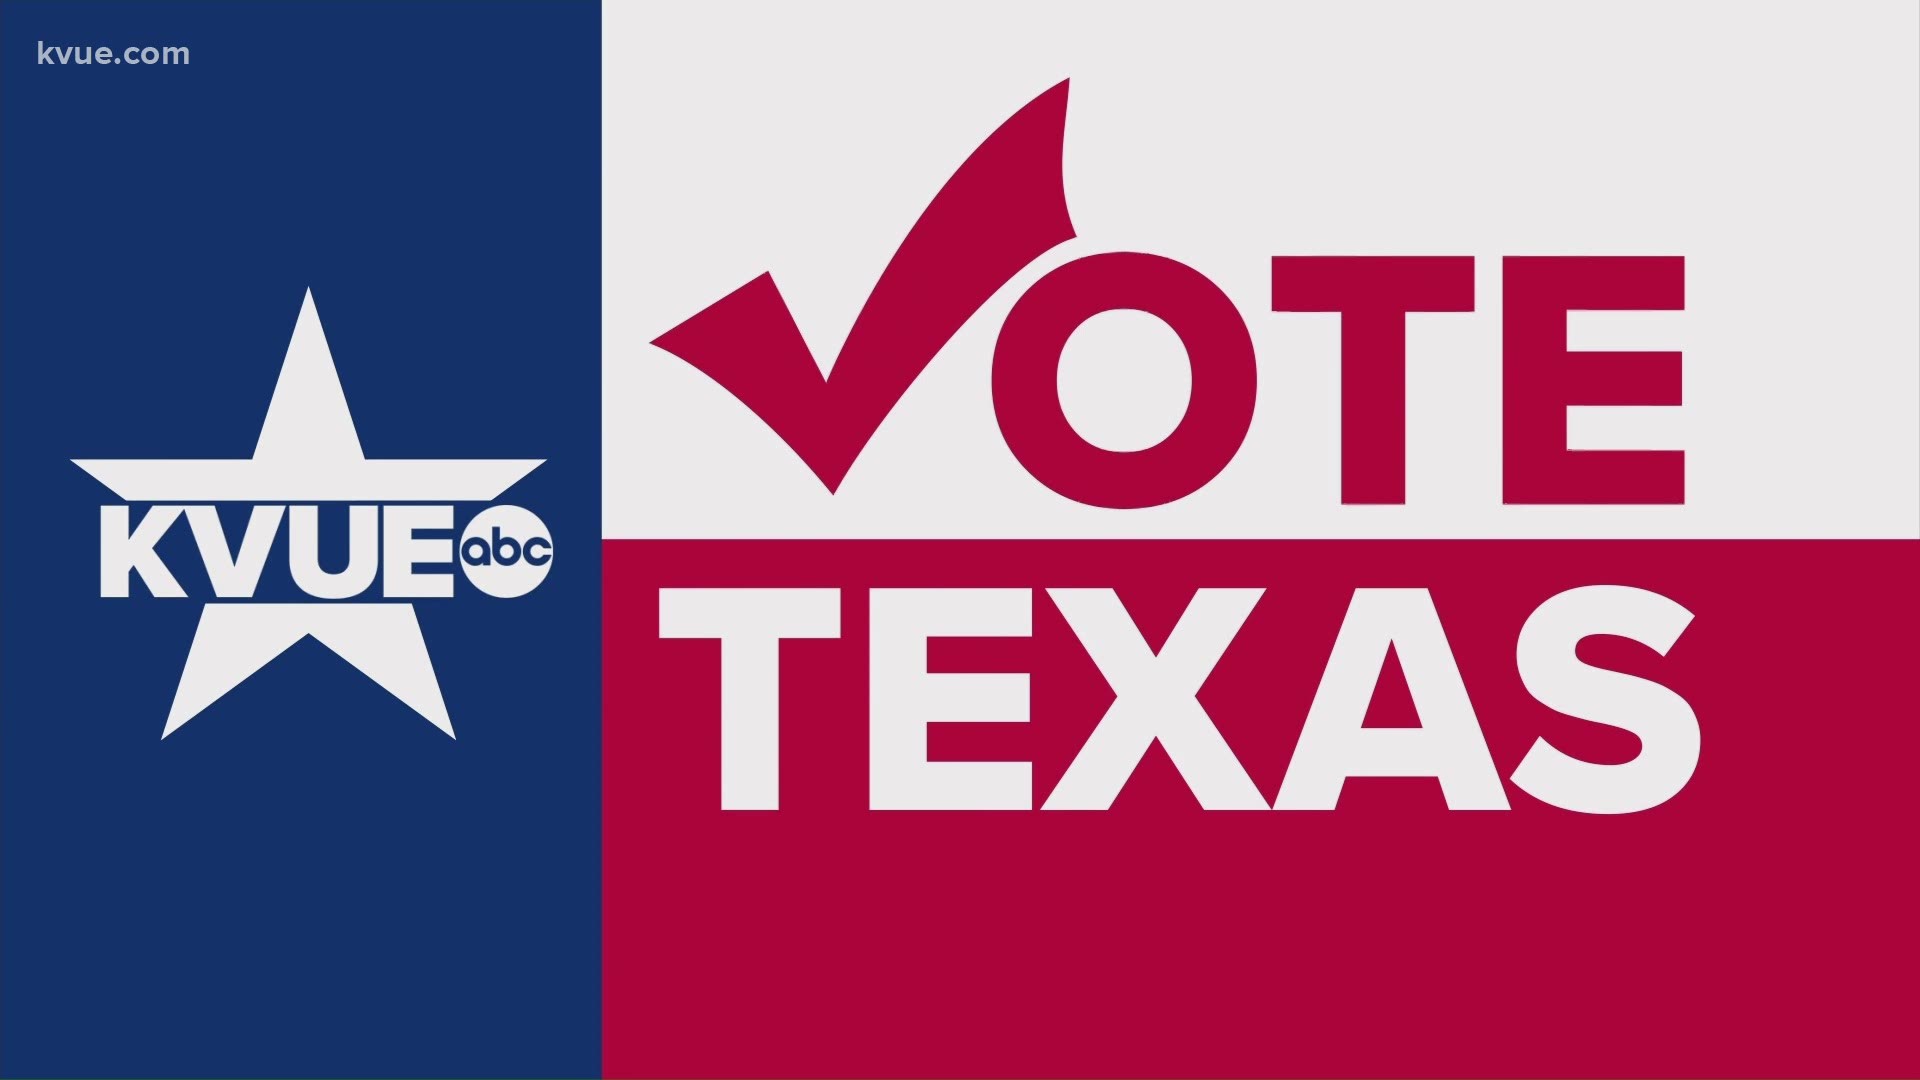 Less than 5% of registered Travis County voters cast their ballots in the primary runoff and special elections during the first week of early voting.